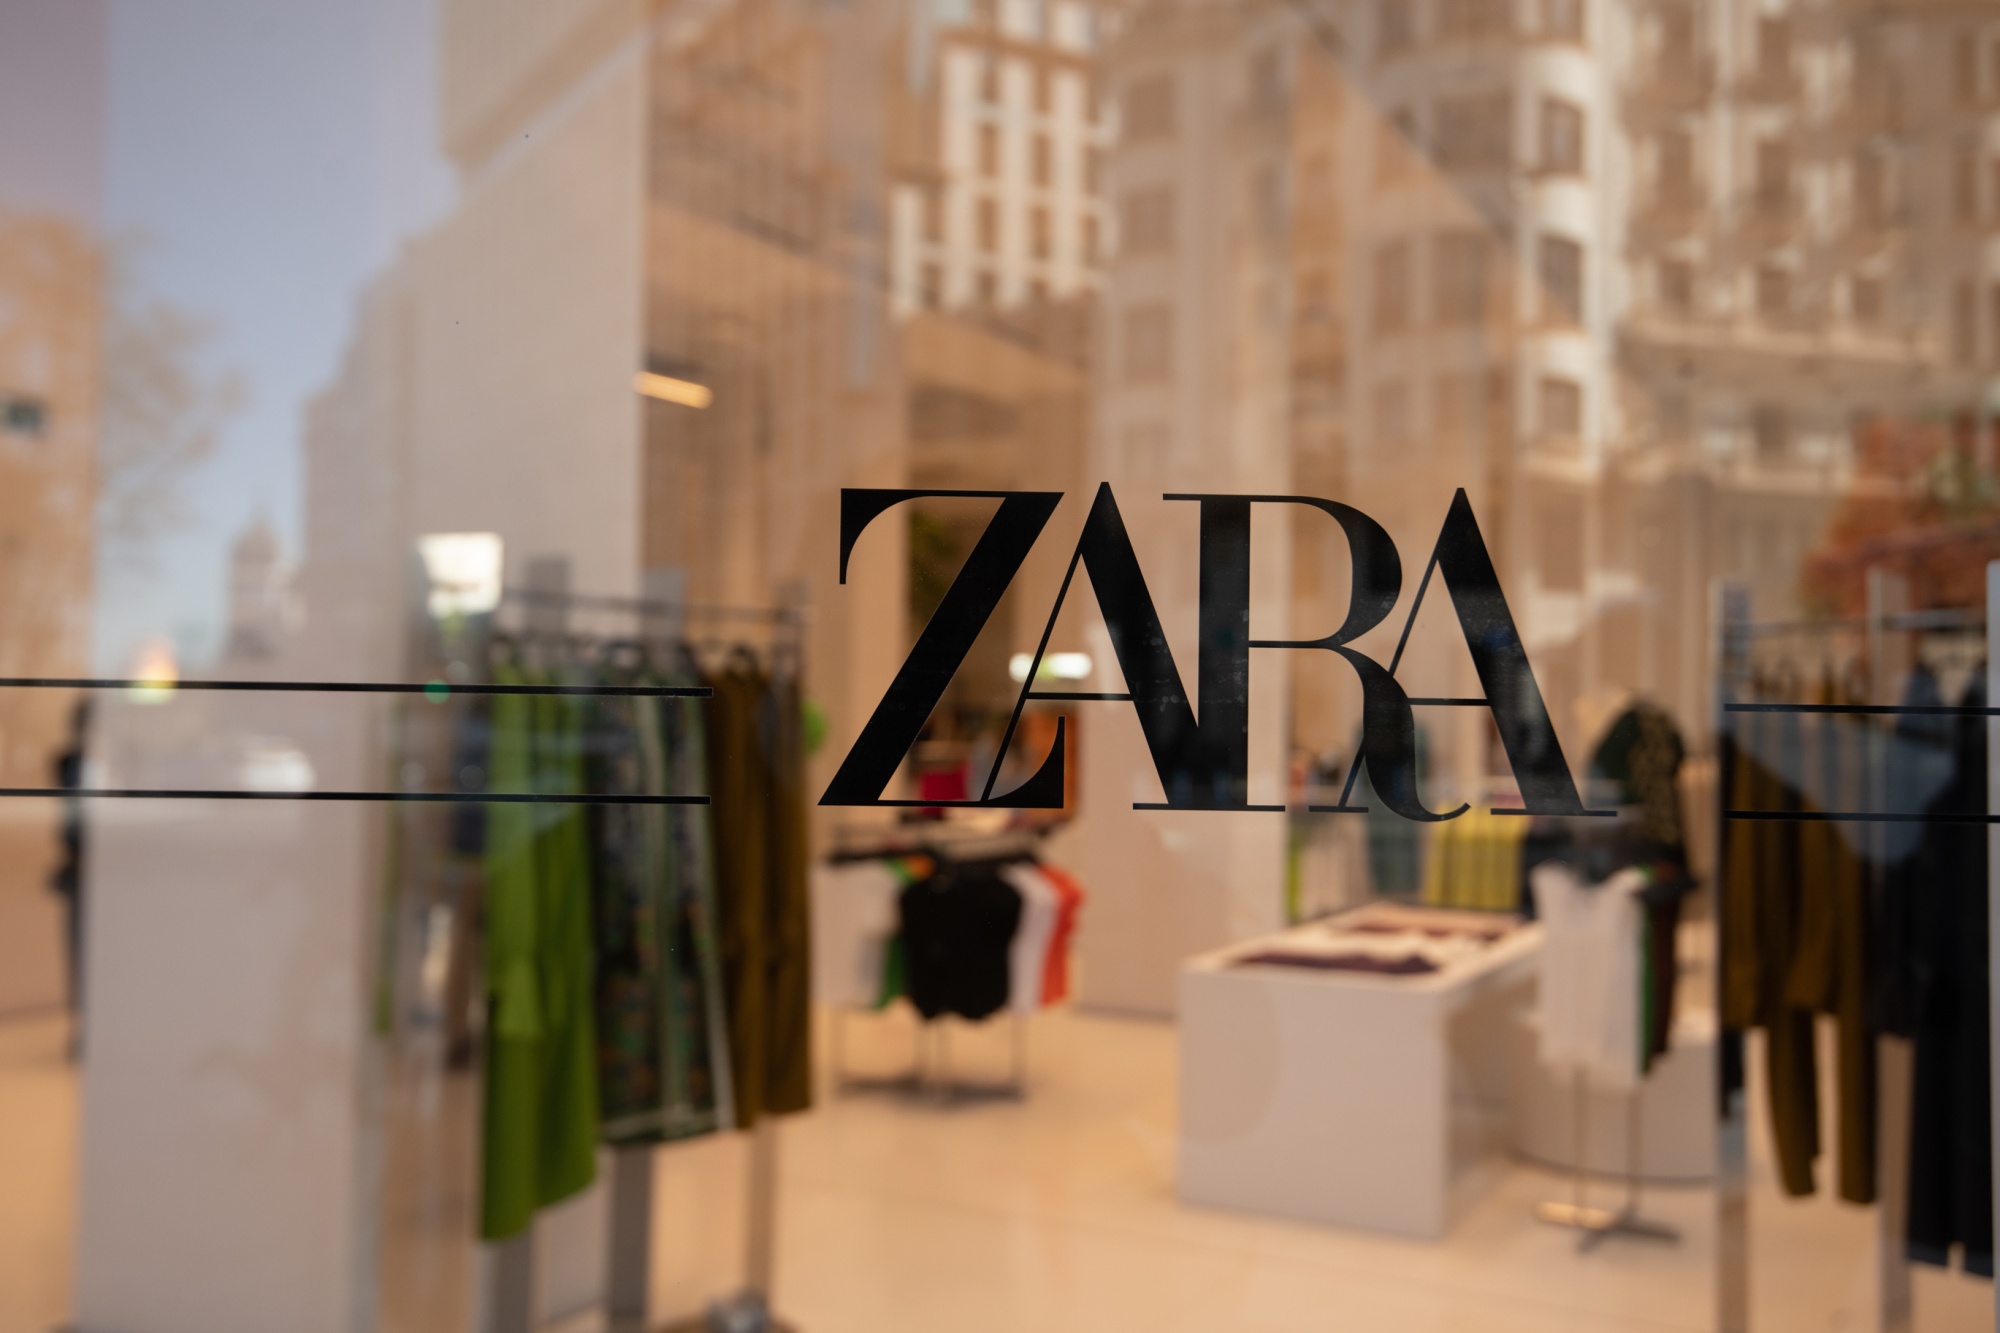 Zara Deliveries: Inditex Strives to Make Fashion Faster - Bloomberg